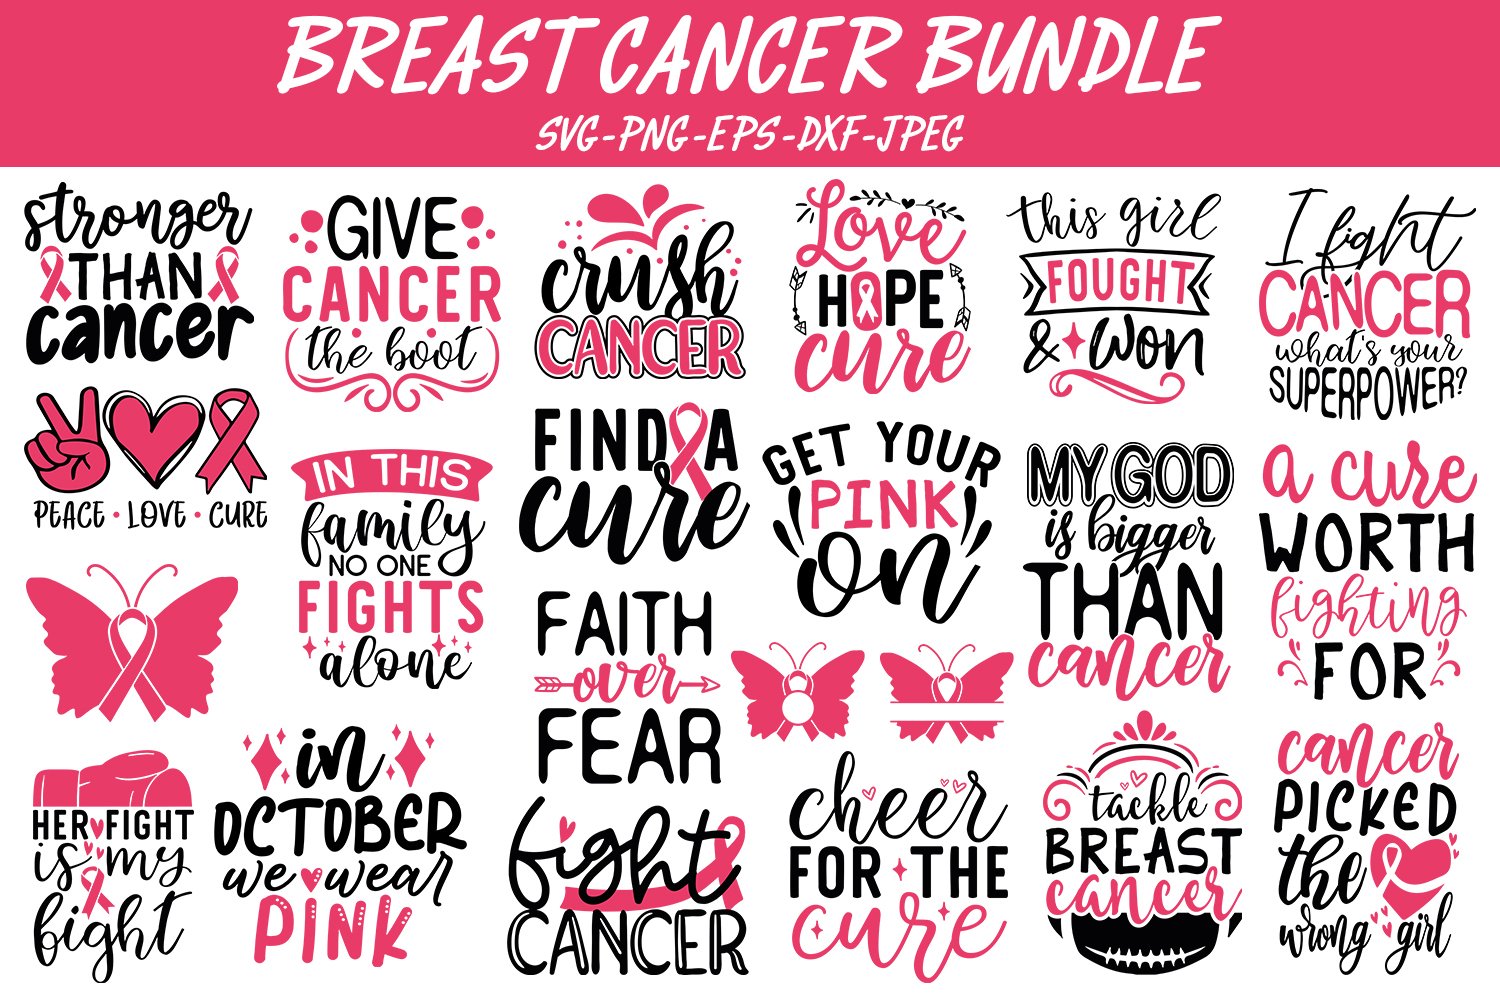 Cool breast cancer quote collection.